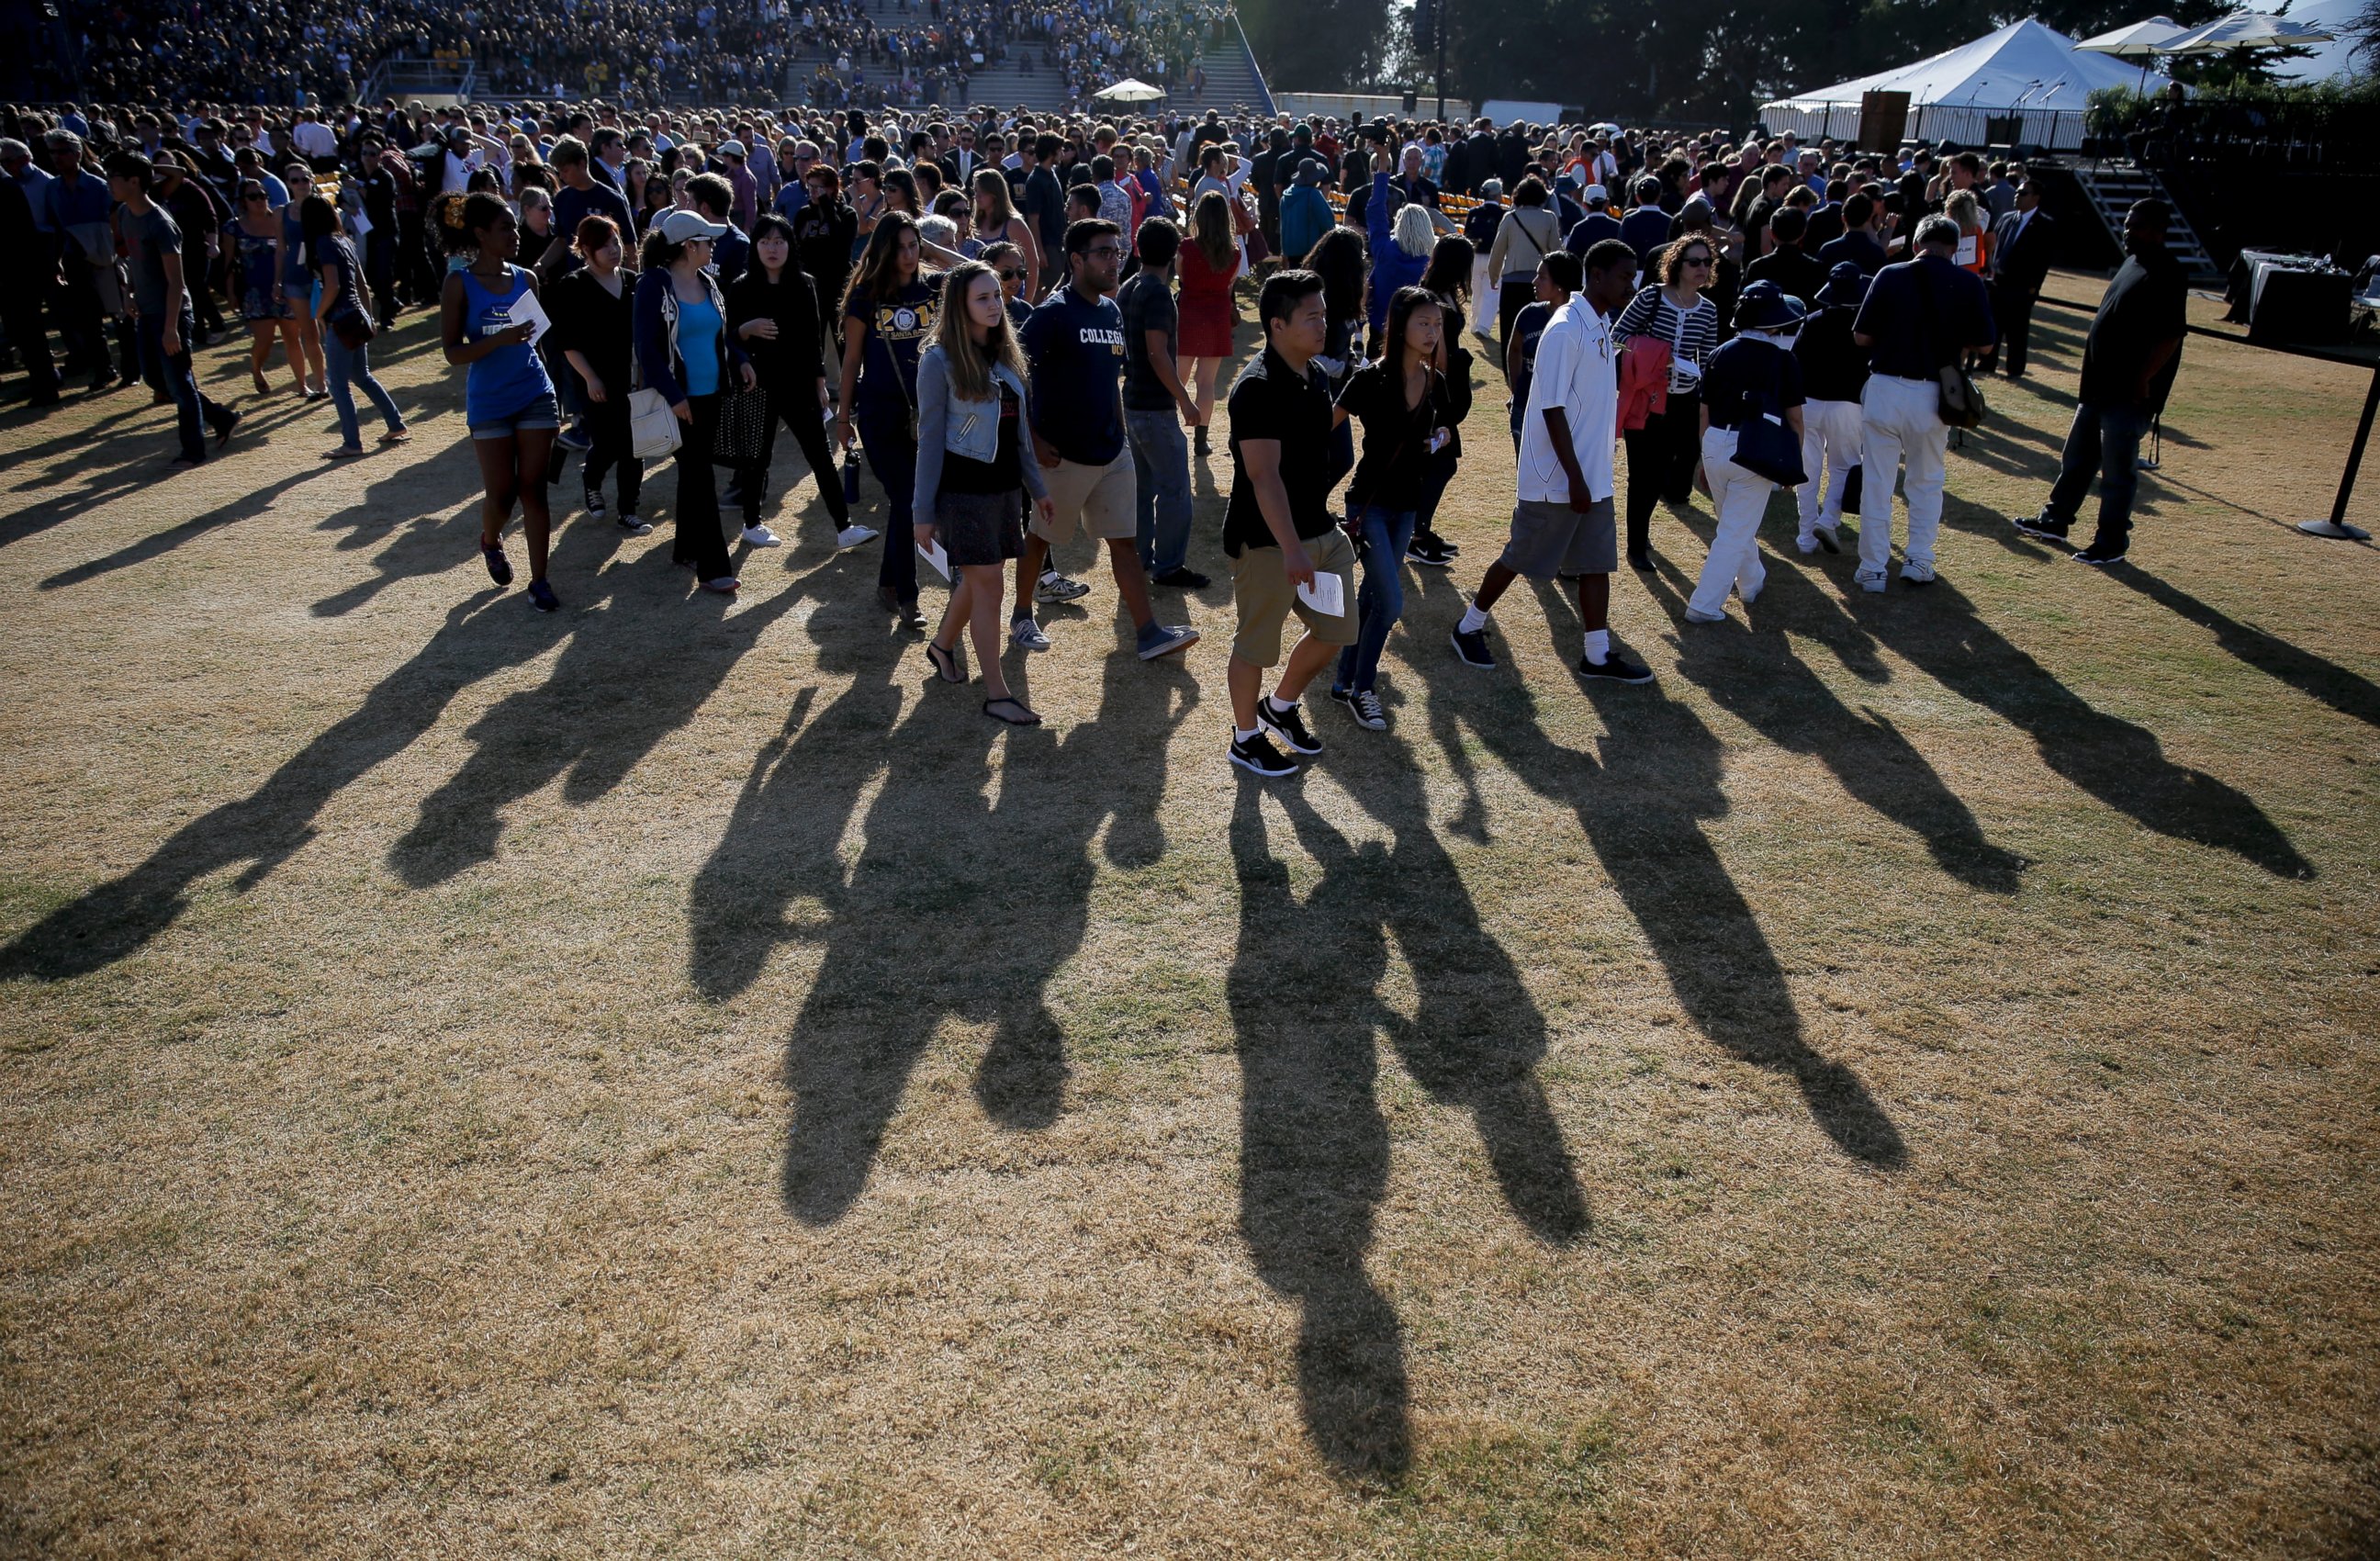 PHOTO: The crowd leaves after a memorial service for the victims and families of Friday's rampage at Harder Stadium on the campus of University of California, Santa Barbara, May 27, 2014.